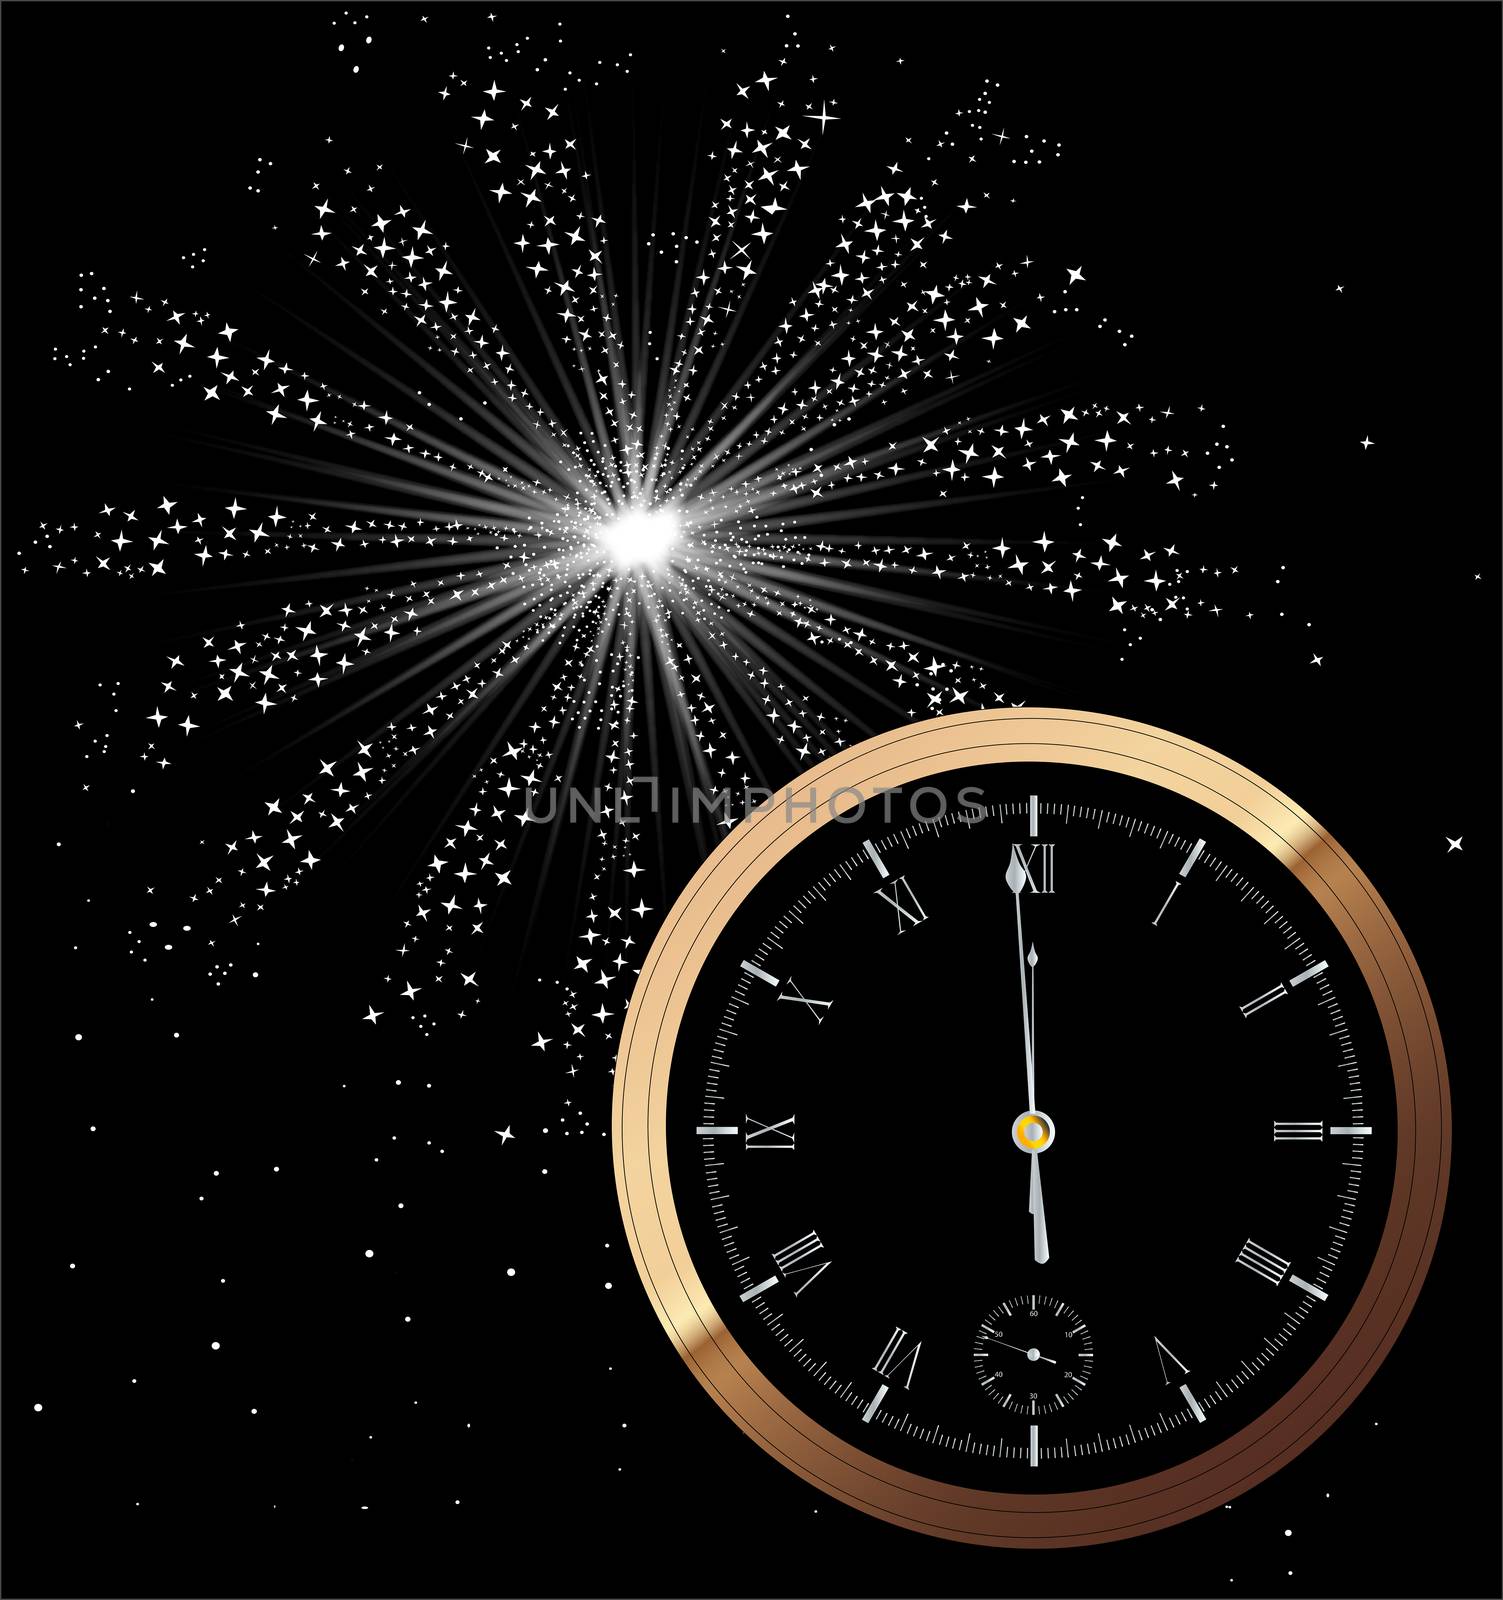 A New Year clock showing almost midnight.